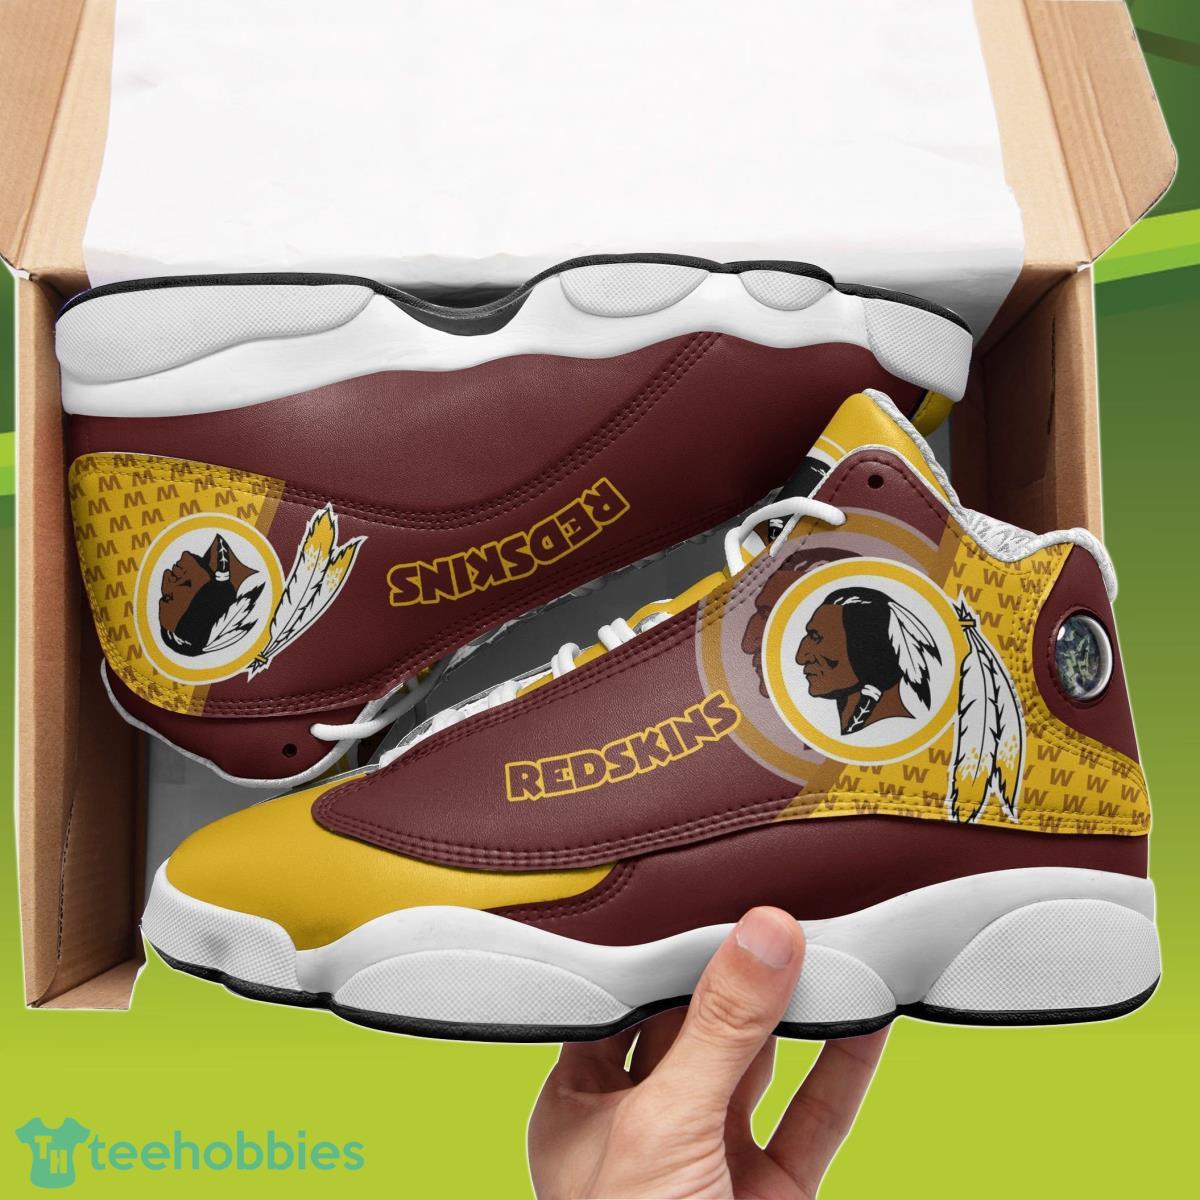 Washington Redskins Air Jordan 13 Sneakers Best Gift For Men And Women Product Photo 1